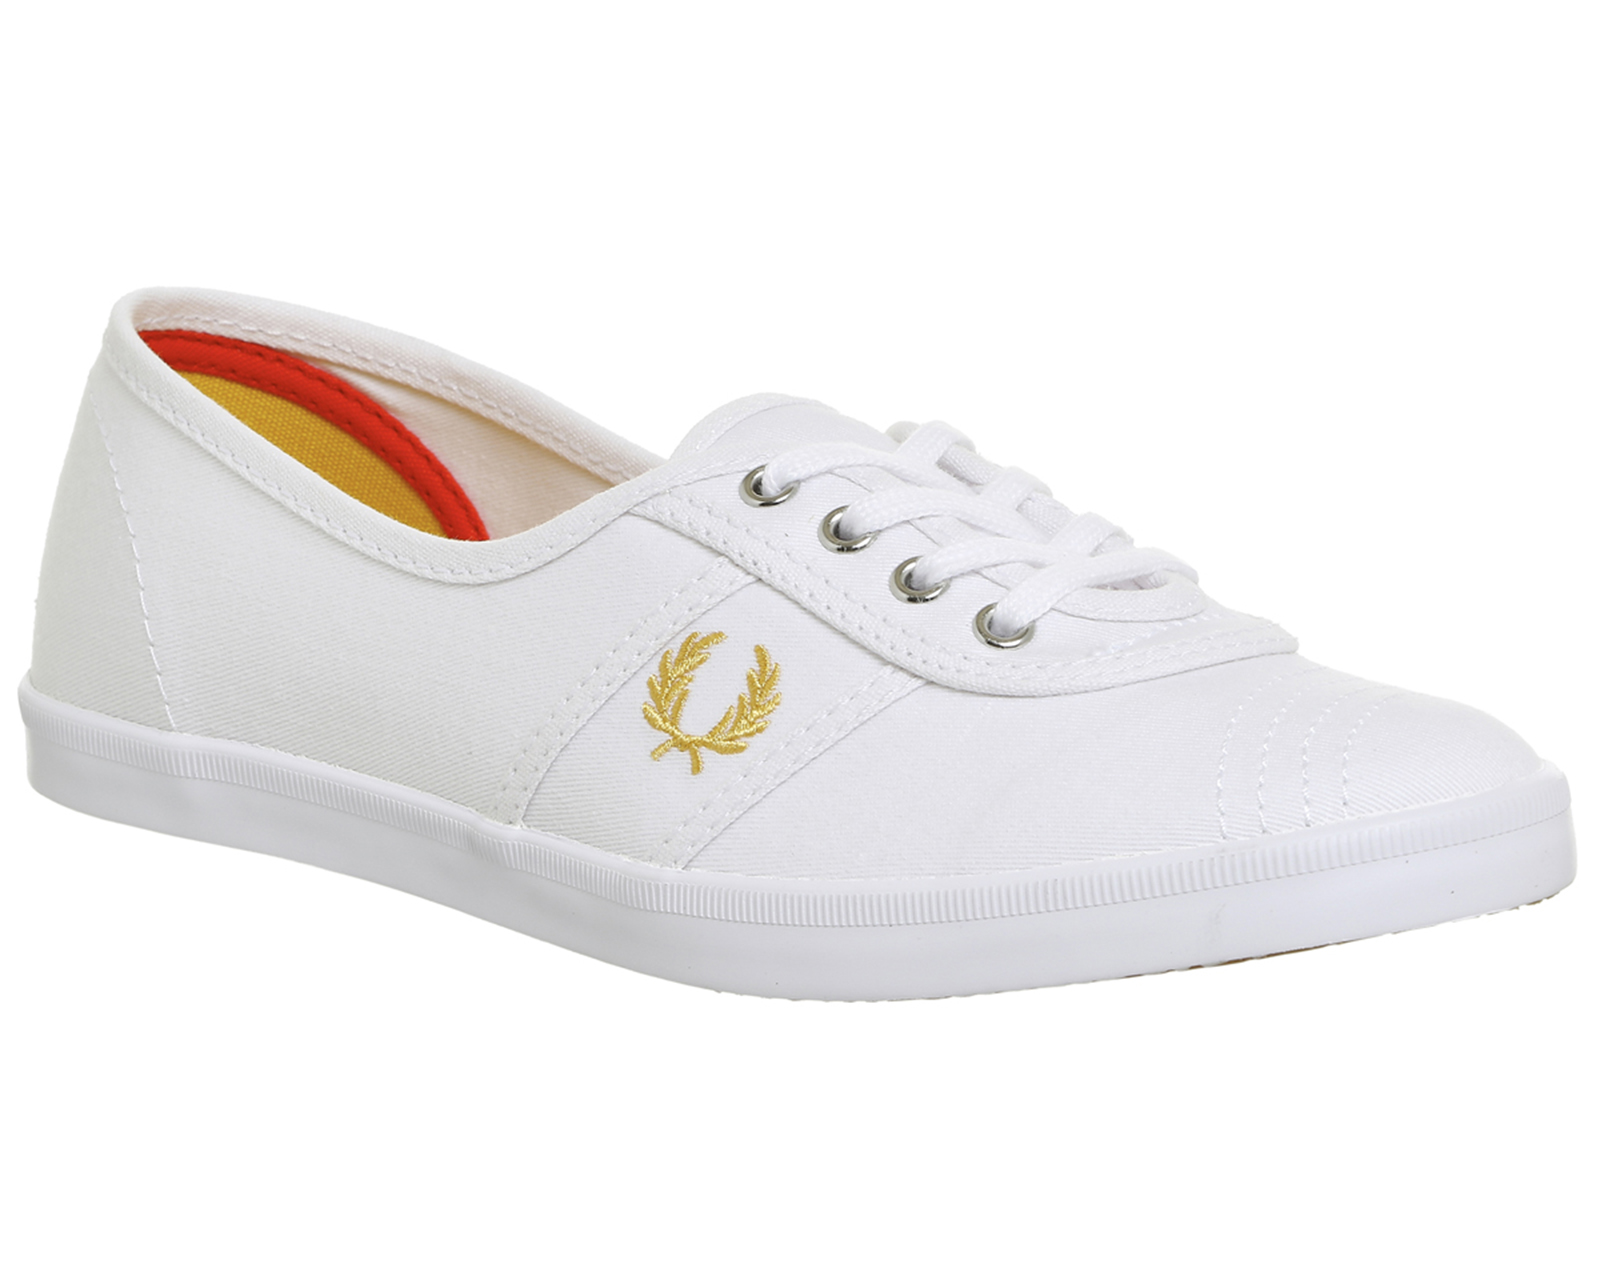 fred perry plimsolls womens